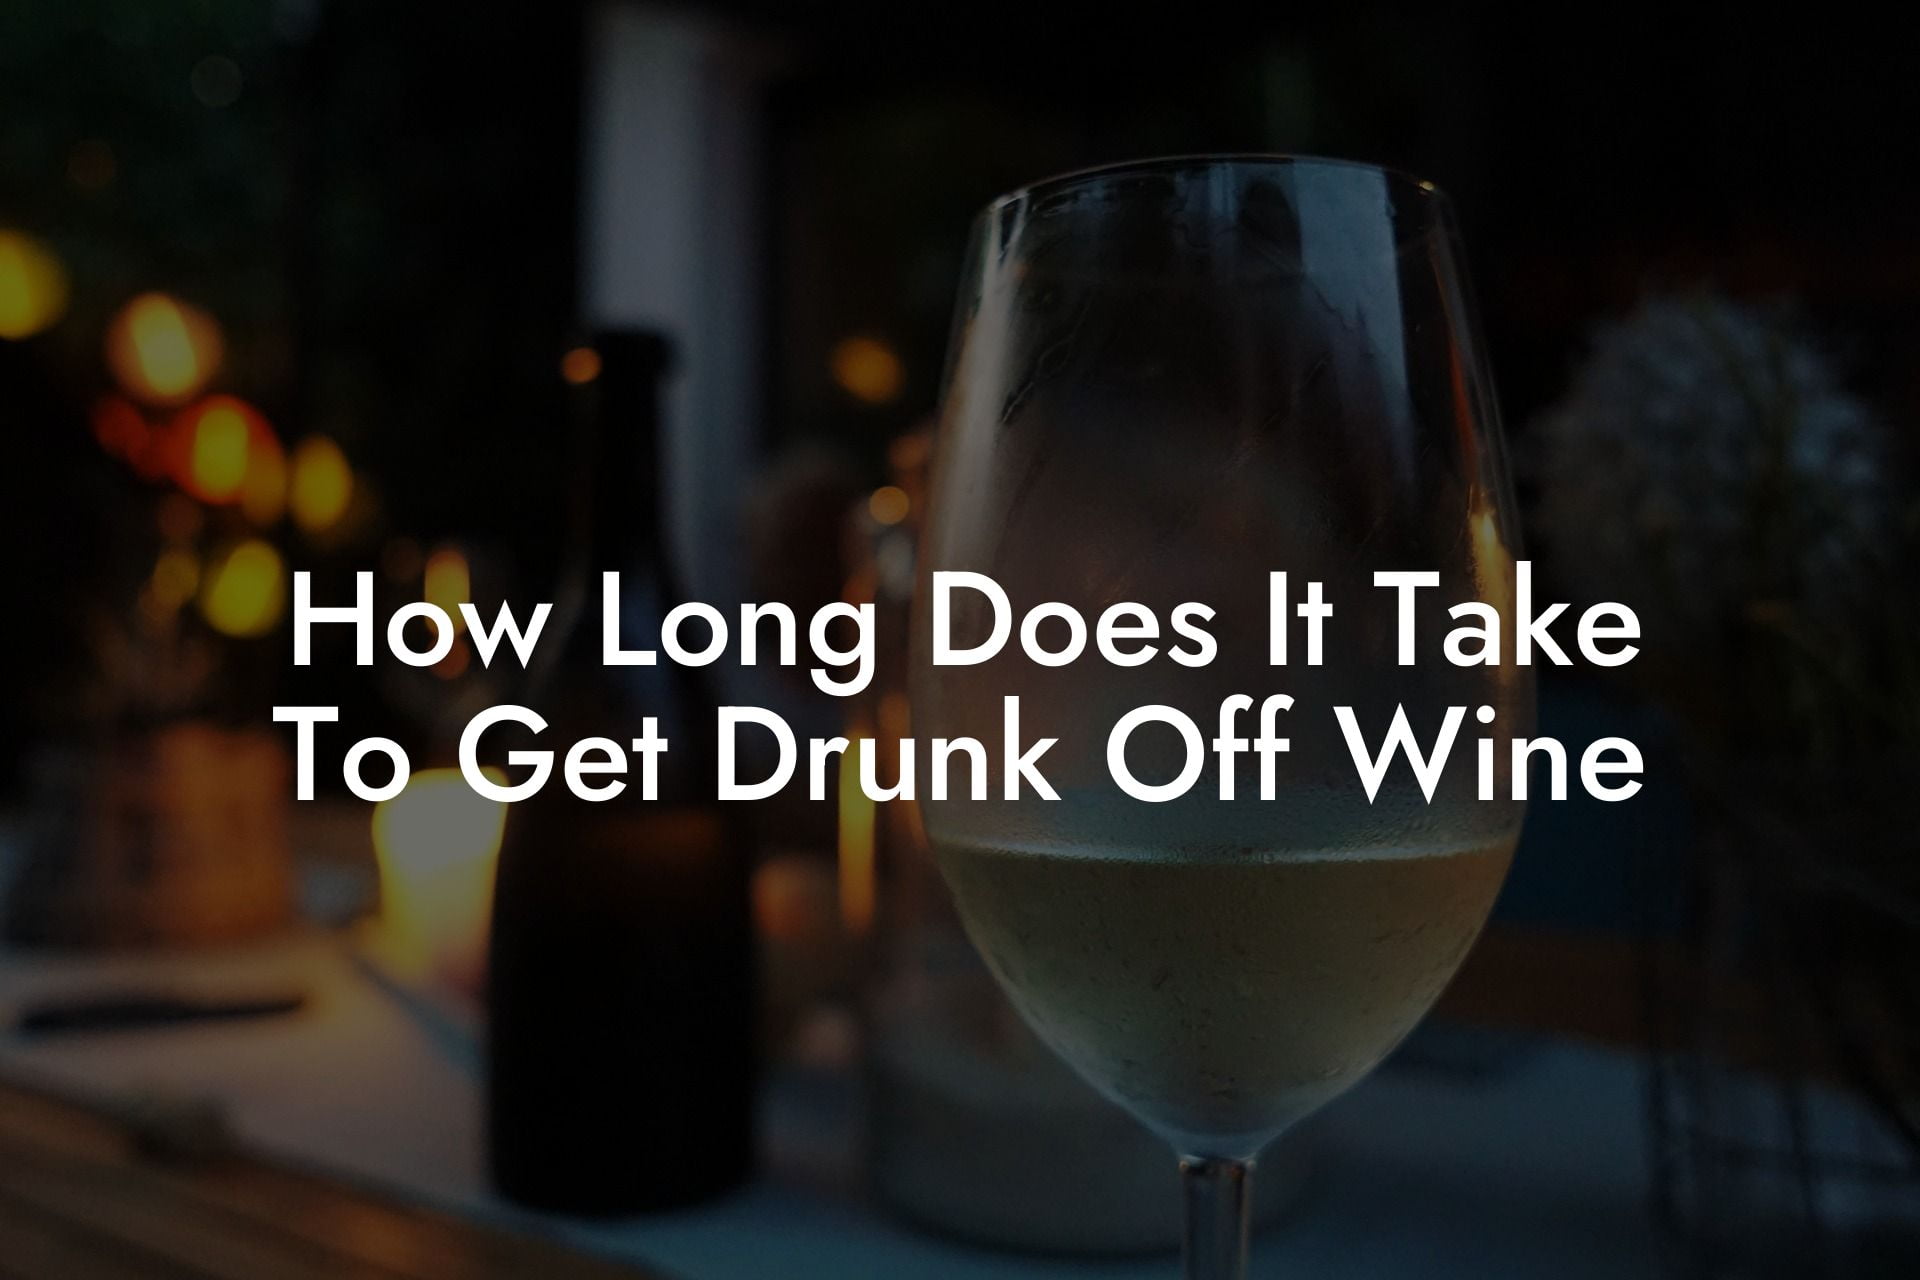 How Long Does It Take To Get Drunk Off Wine